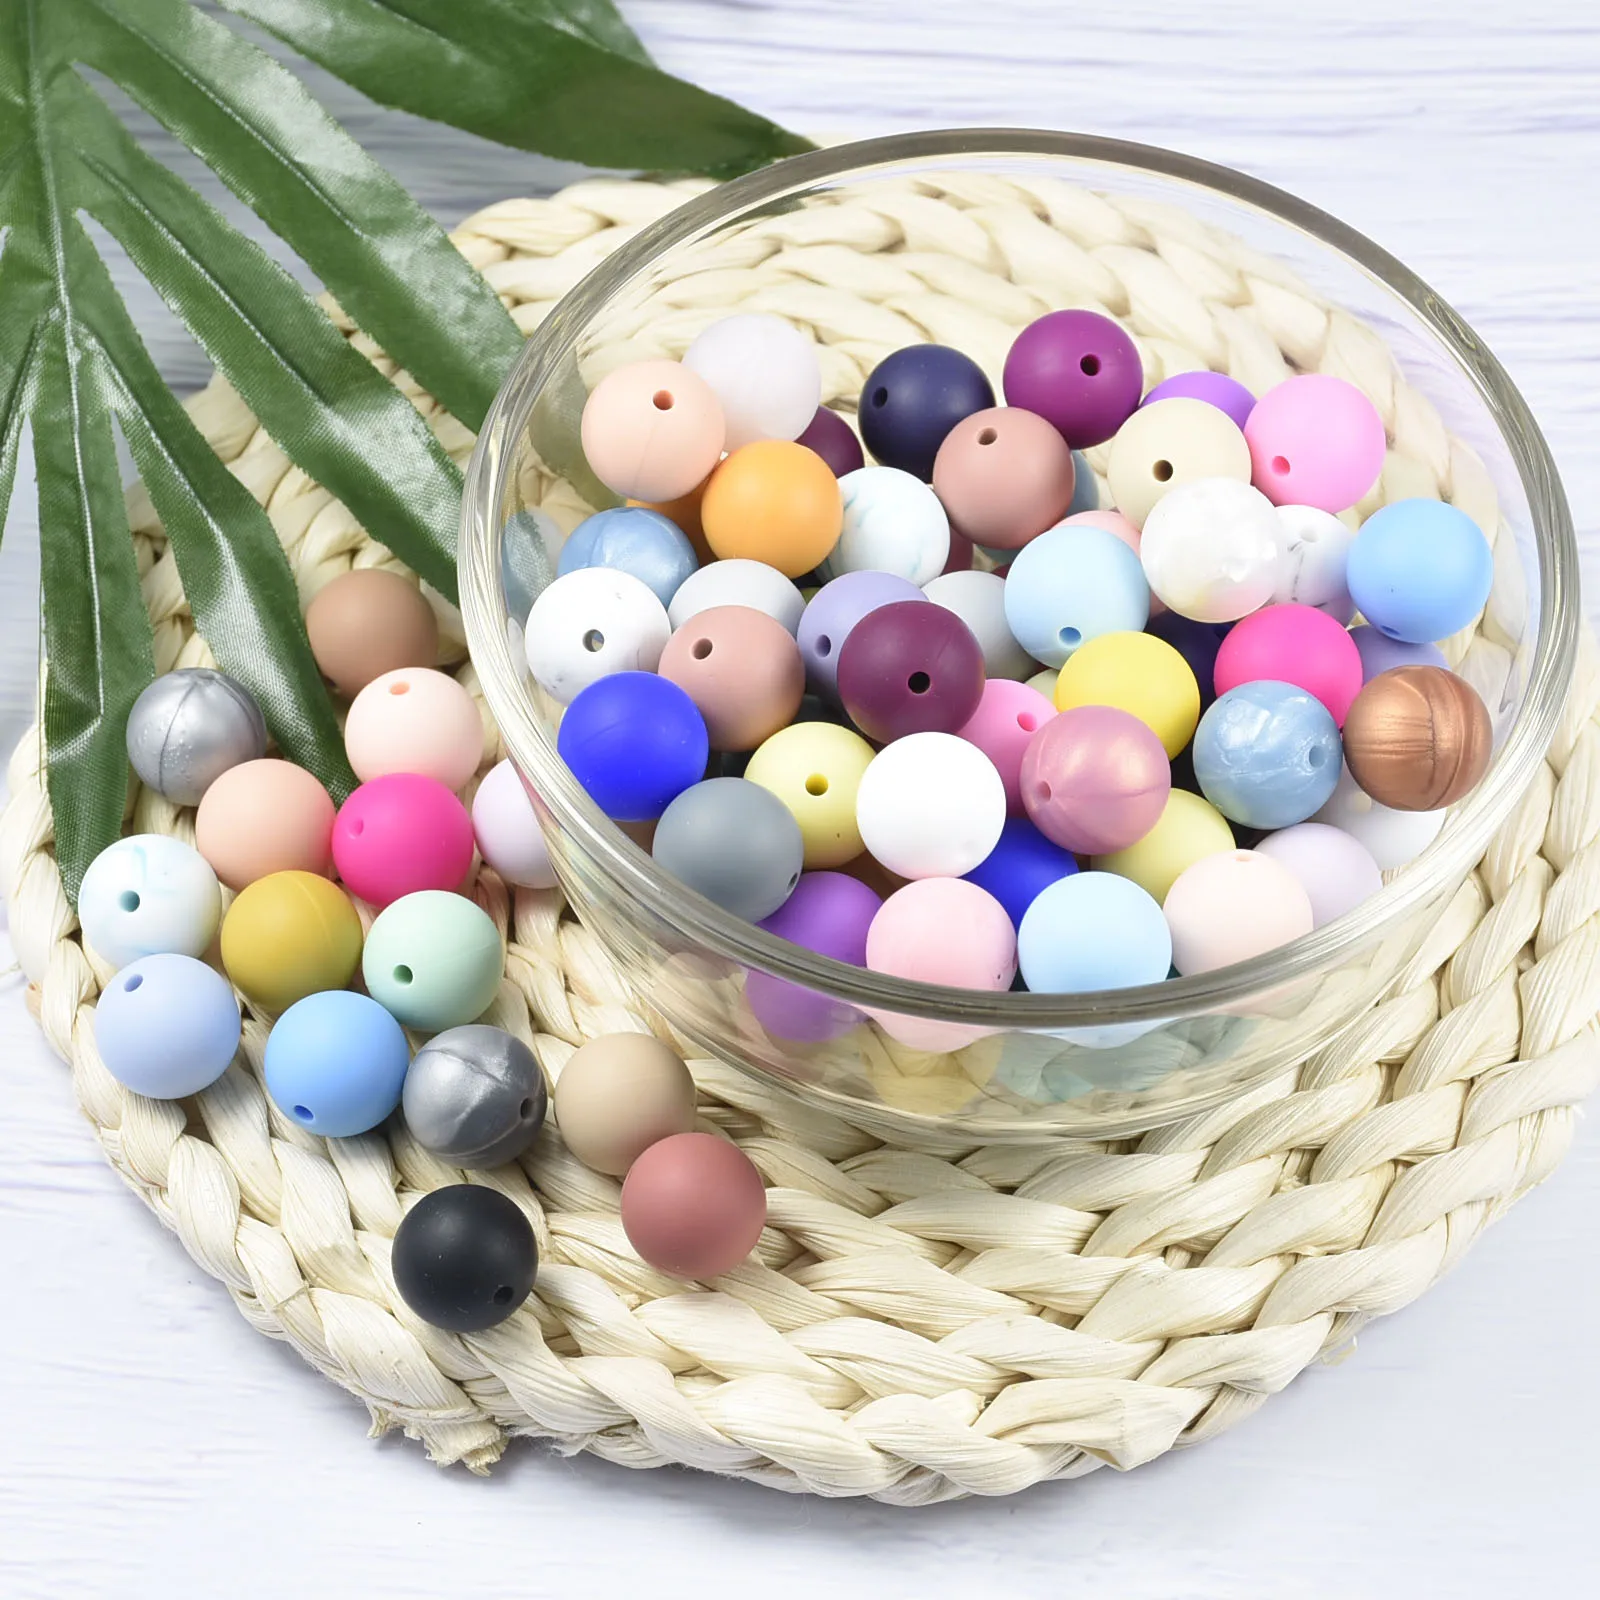 

100 PCS 15 MM Silicone Round Beads Eco-friendly Sensory Teething Necklace Food Grade Mom Nursing DIY Jewelry Baby Teethers